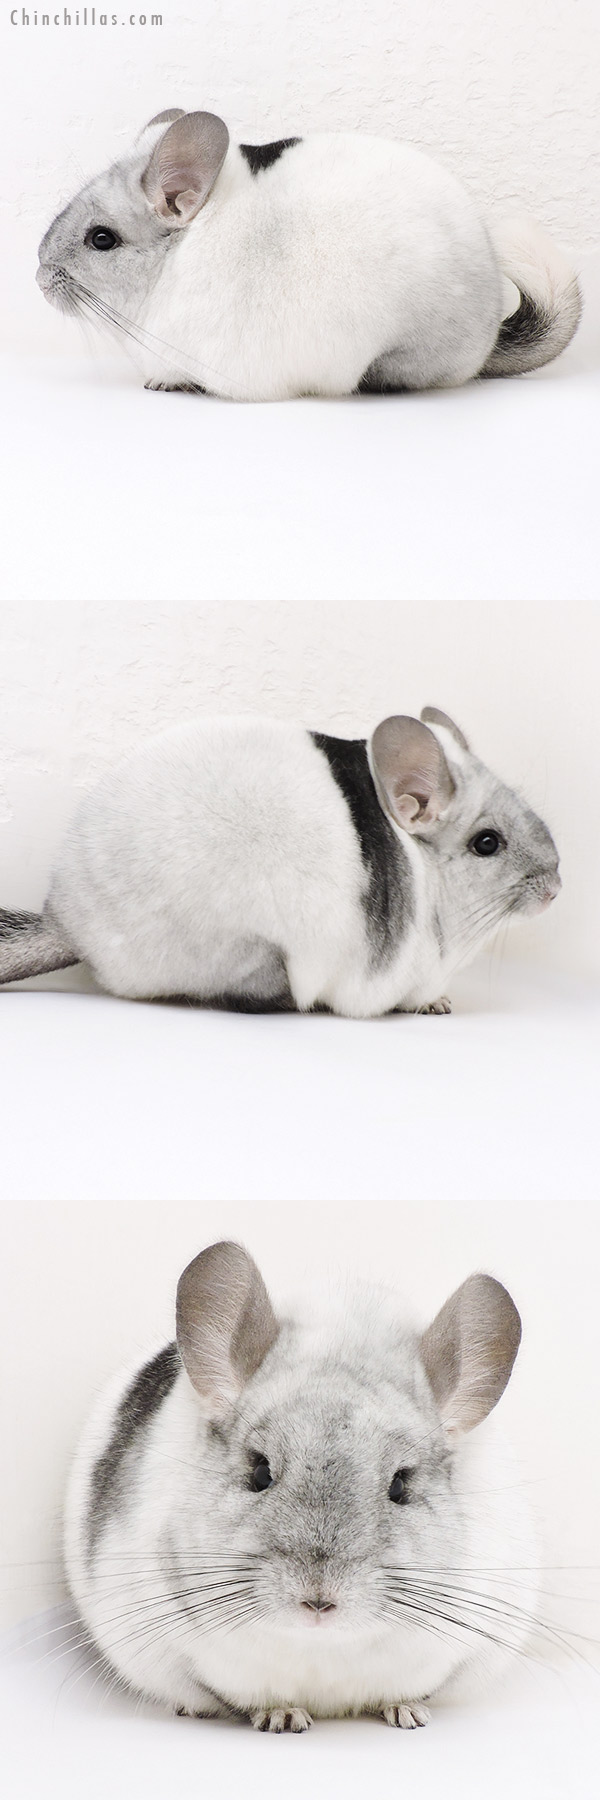 Chinchilla or related item offered for sale or export on Chinchillas.com - 17021 Large Blocky Premium Production Quality Unique White Mosaic Female Chinchilla